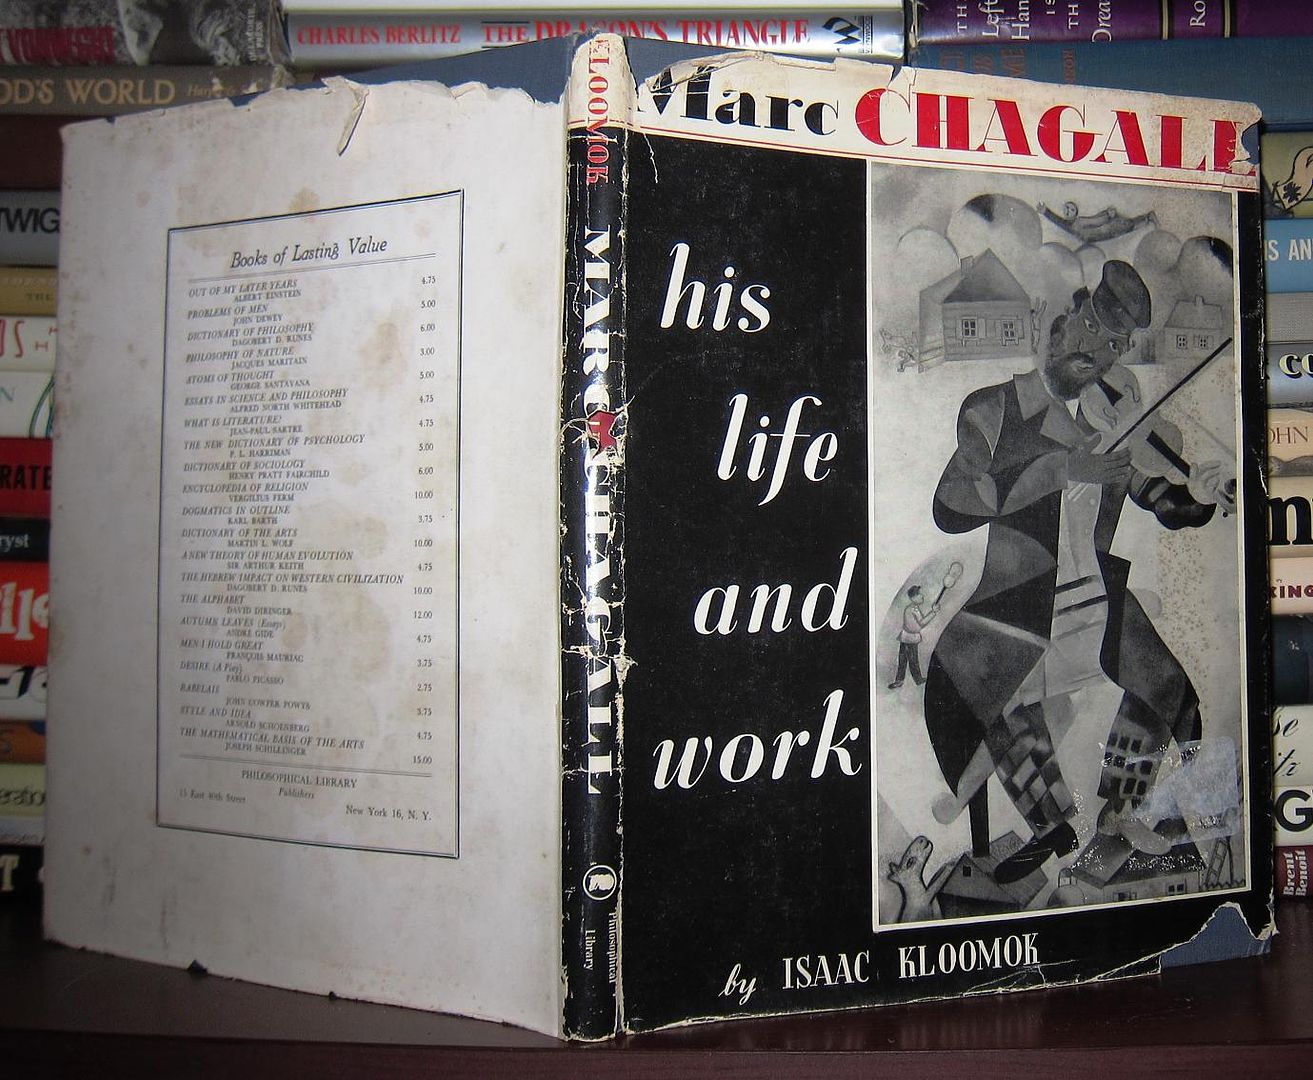 KLOOMOK, ISAAC; CHAGALL, MARC - Marc Chagall : His Life and Work